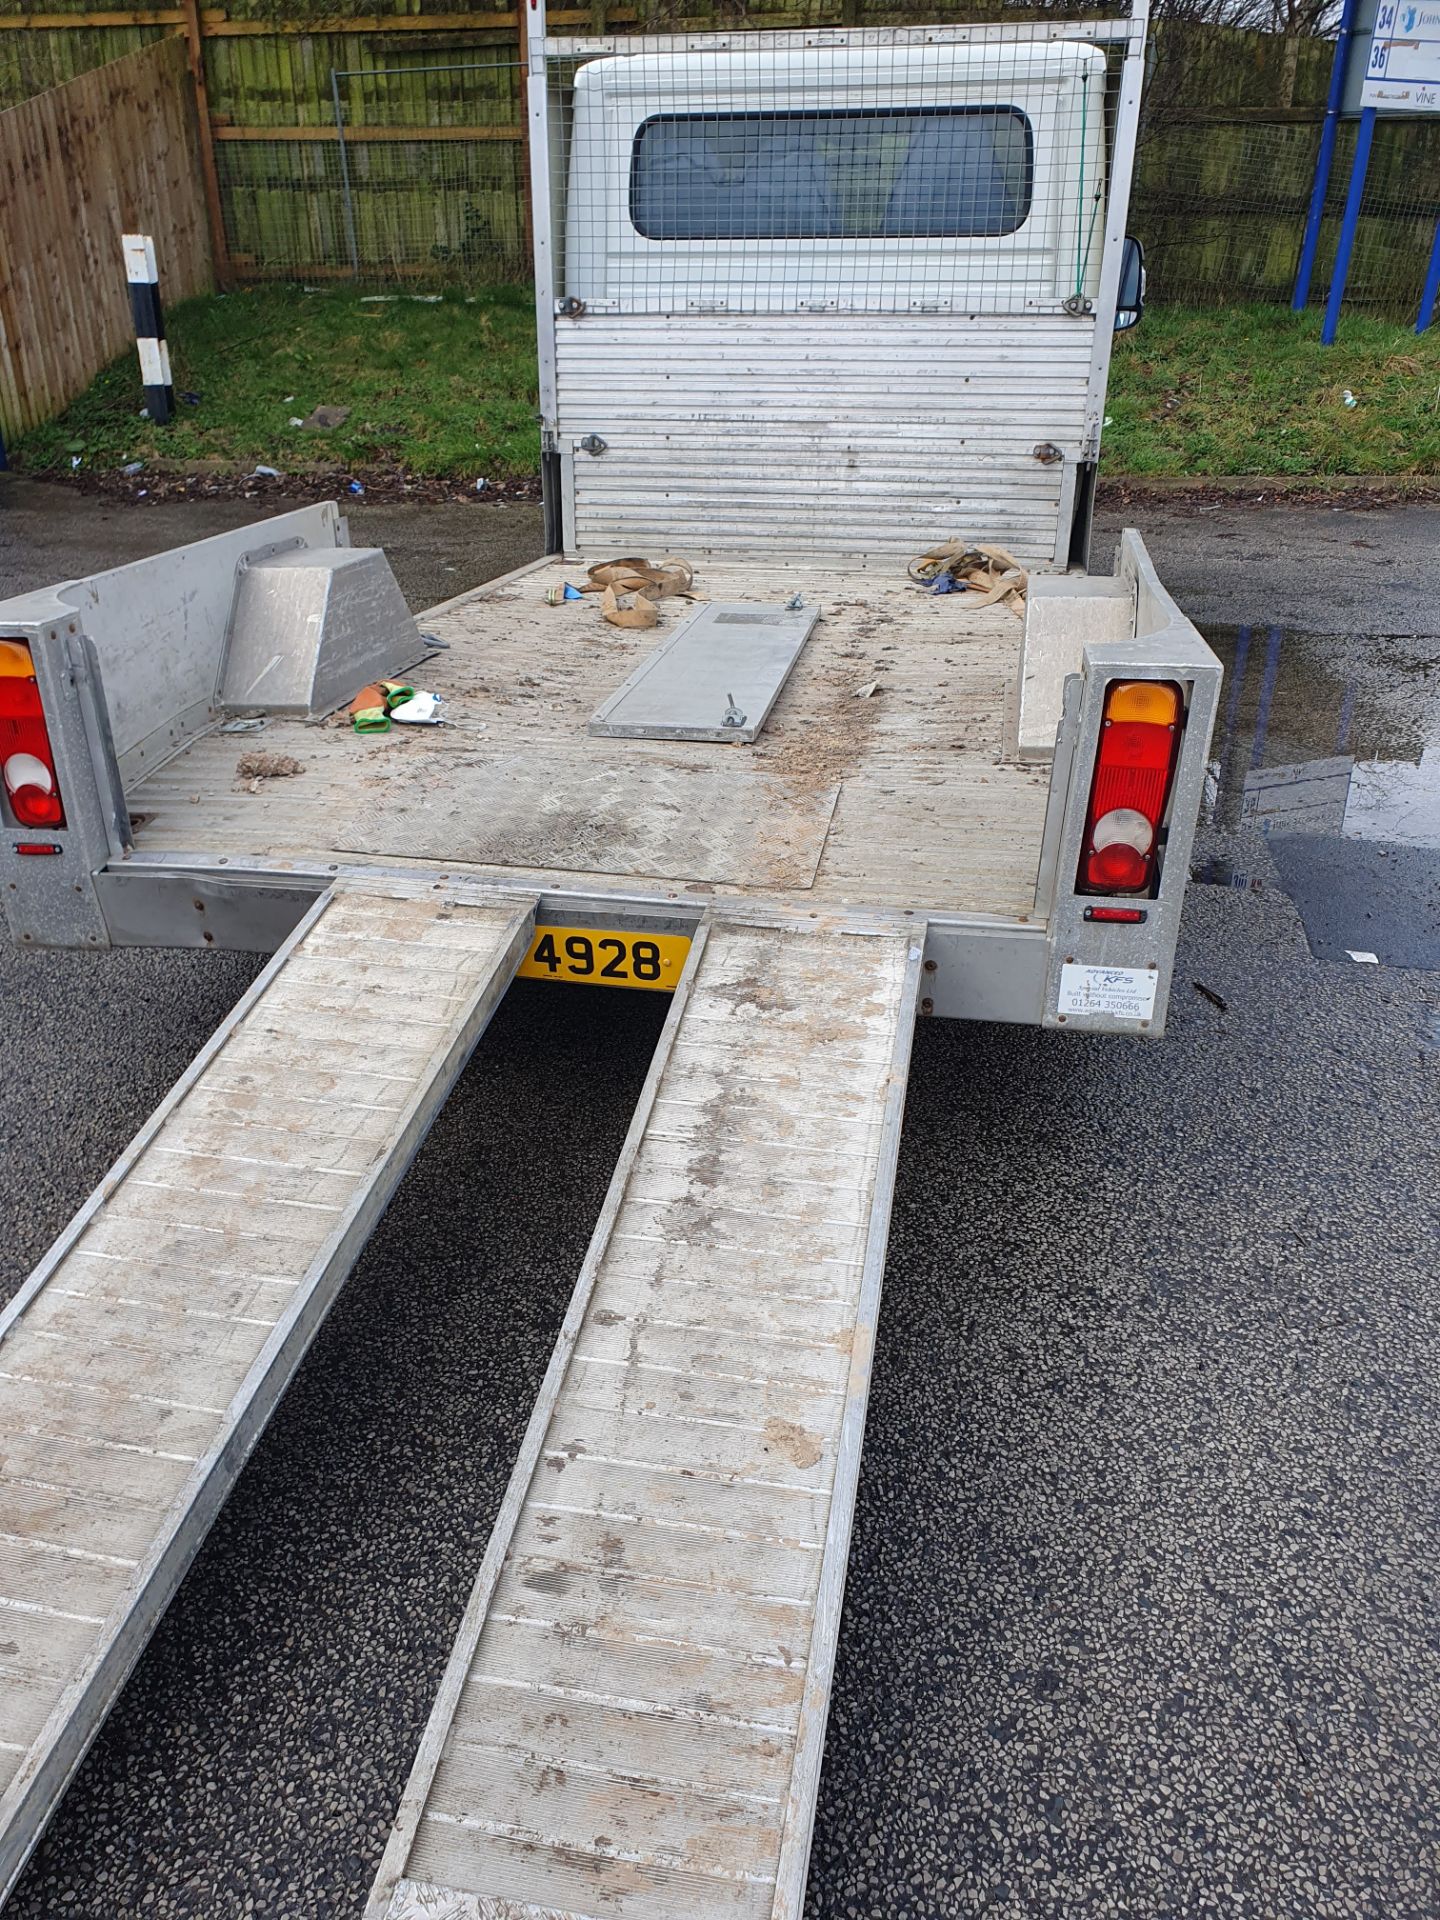 Citroen Relay X2-50 Flat Lorry w/ Loading Ramp Sides | DIG 4928 | 148,060 Miles - Image 14 of 20